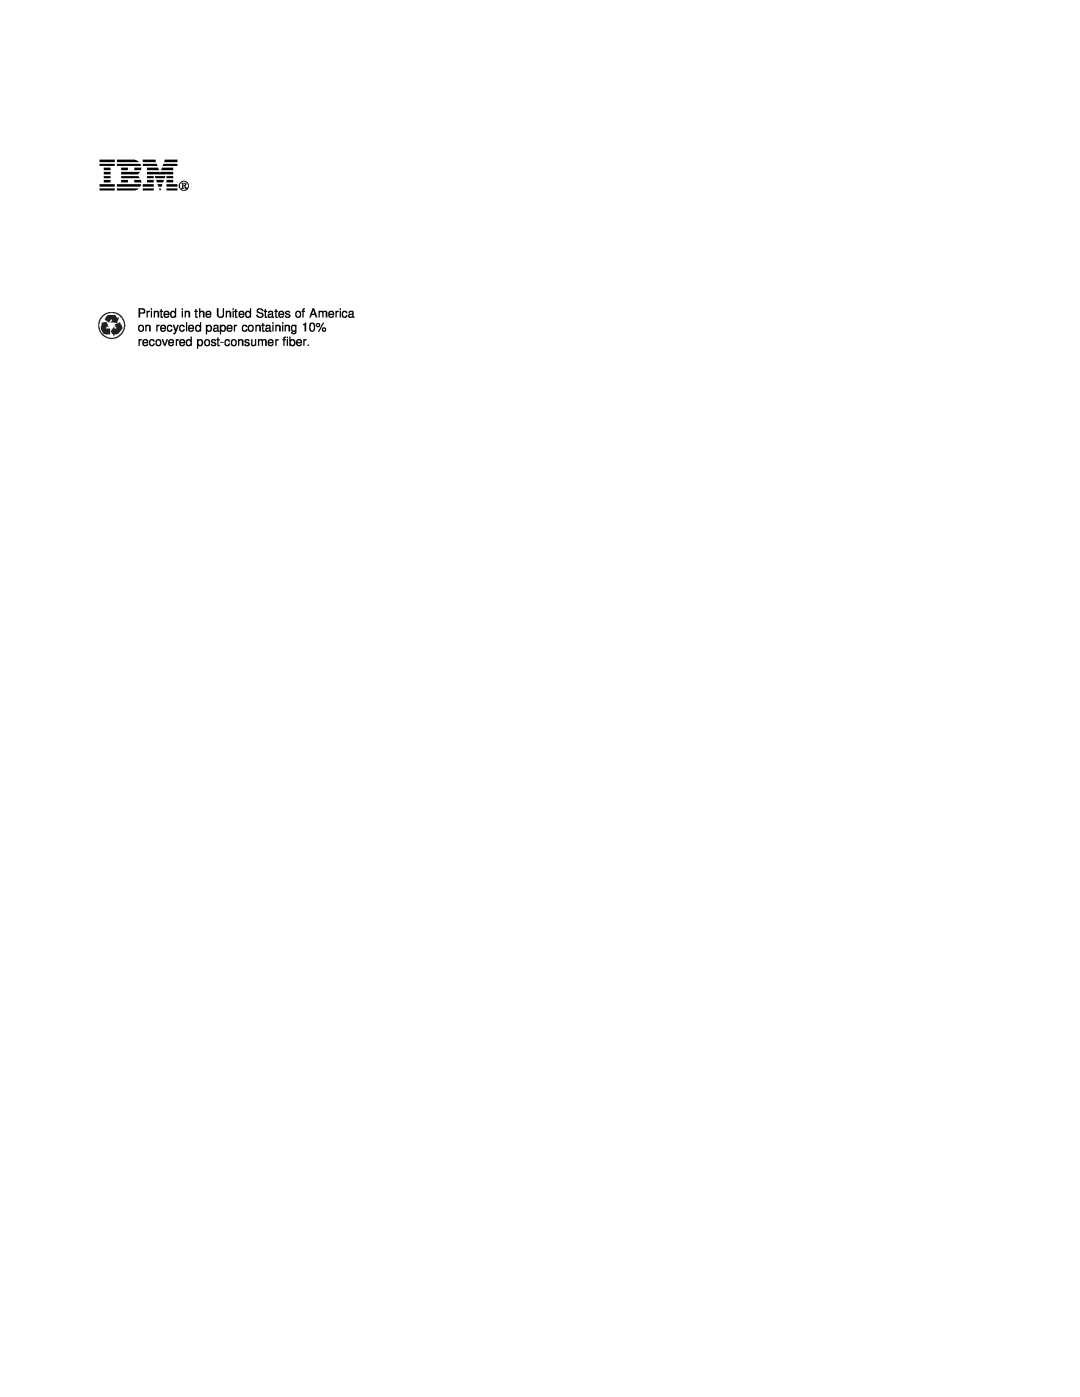 IBM ARTIC186 Ibm, Printed in, the United, States of America, on recycled paper containing 10%, recovered, post-consumer 